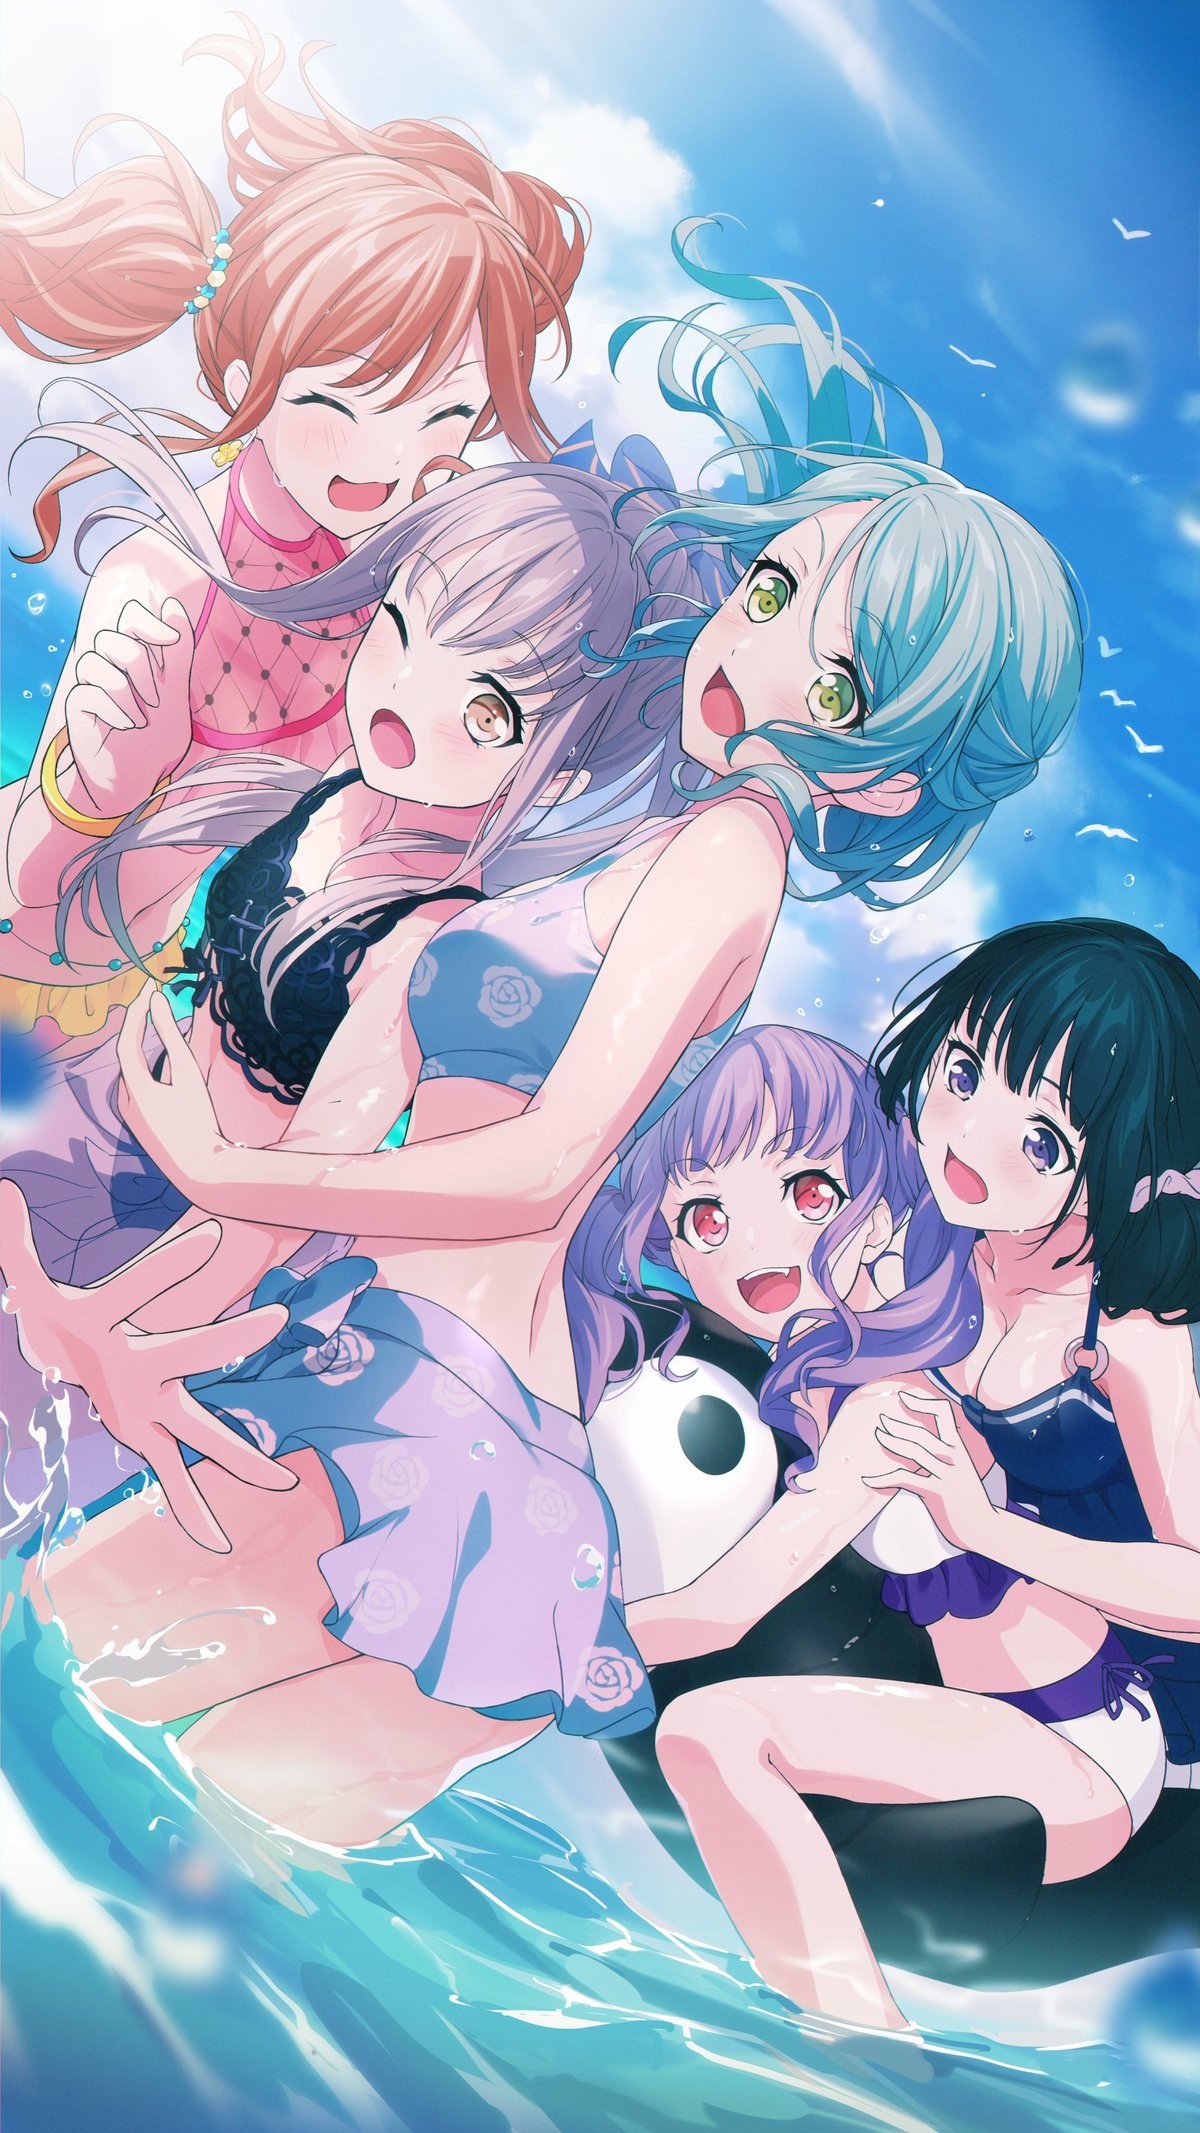 Daily BanG Dream #662. Artist's Twitter post: Girls are from BanG Dream join list: BanGDream (95 subs)Mention History &quot;The sea Roselia is completed! Fanart